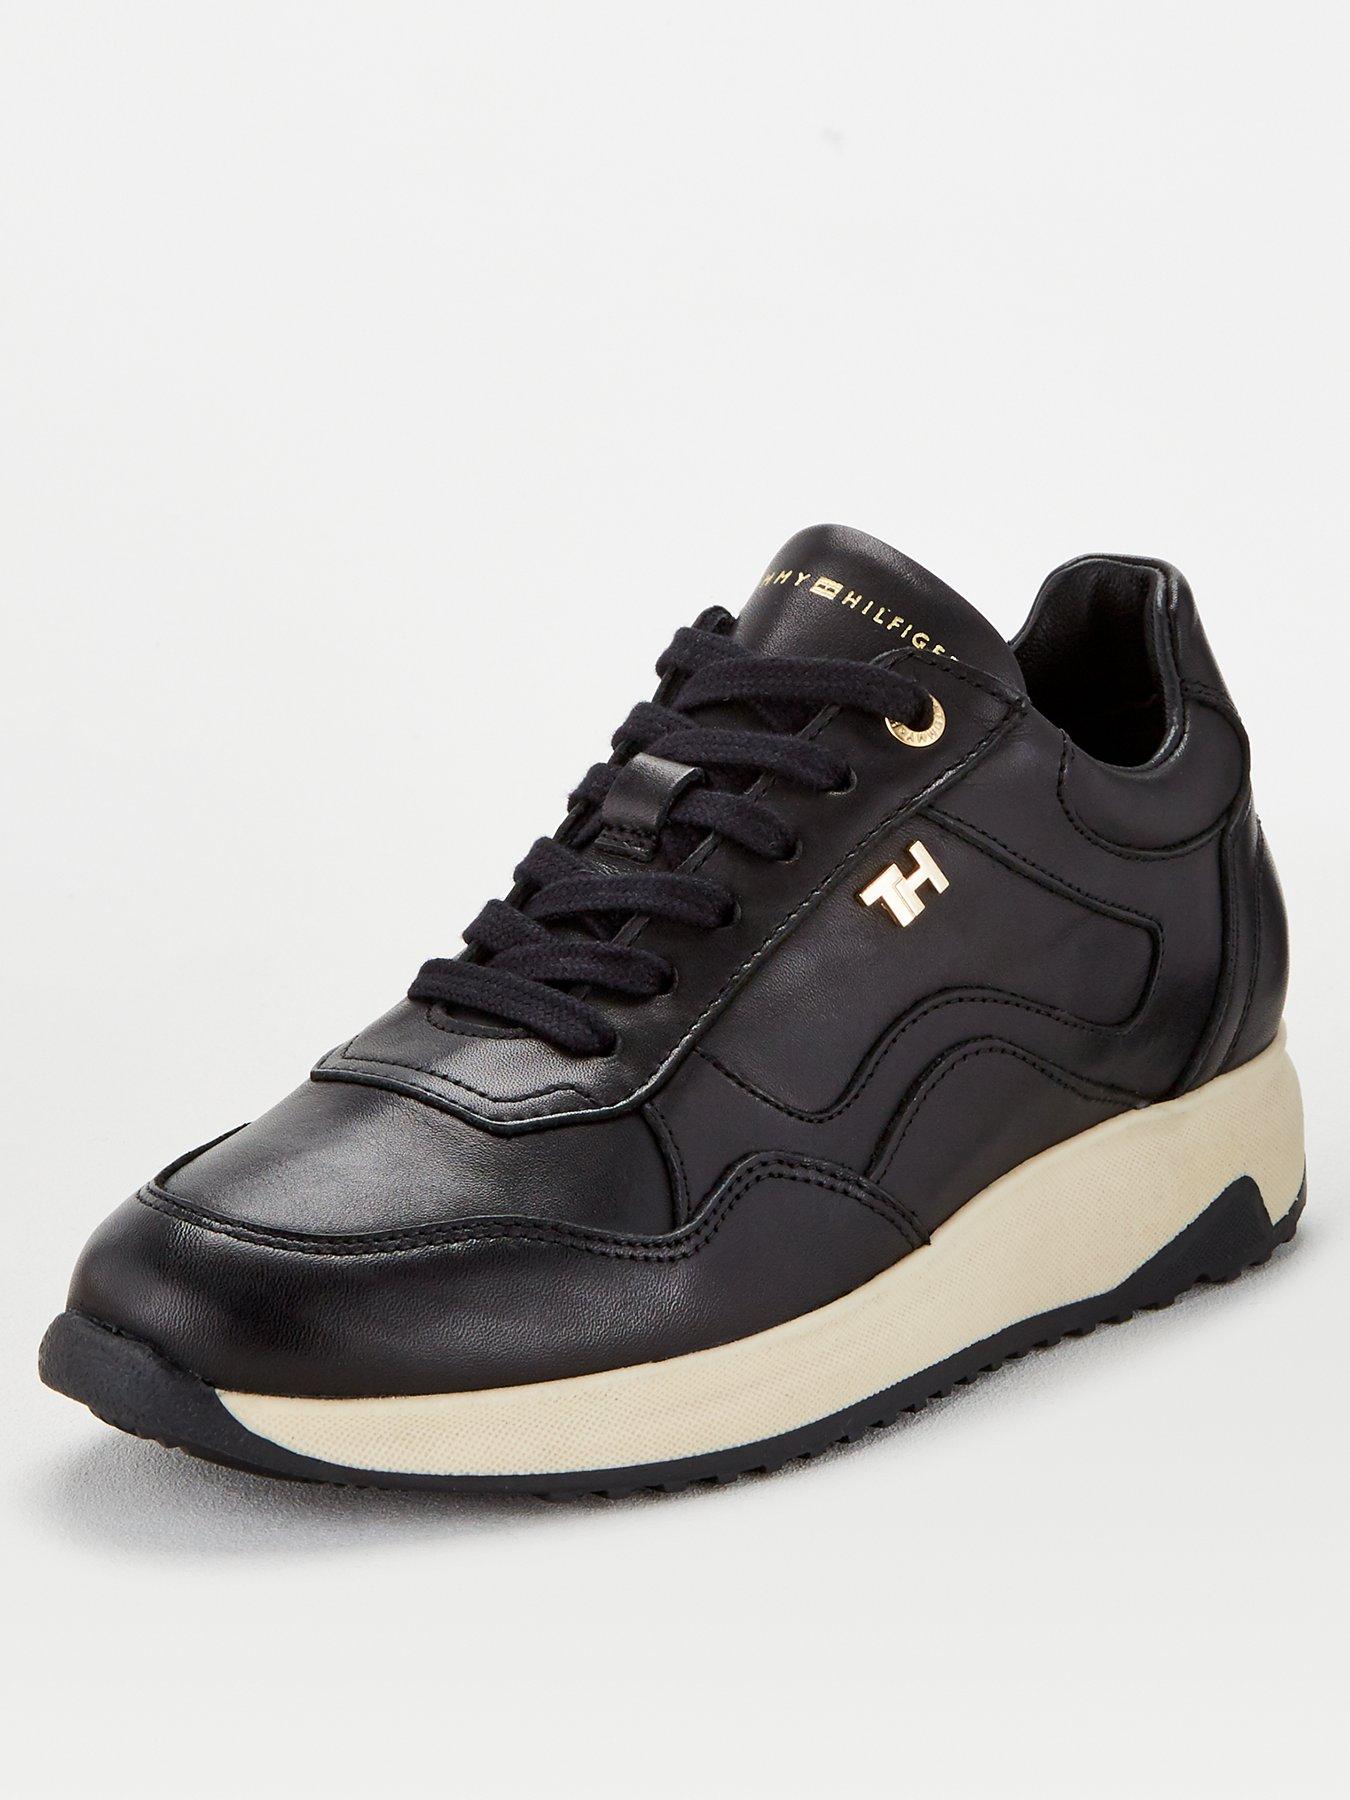 tommy hilfiger black trainers womens